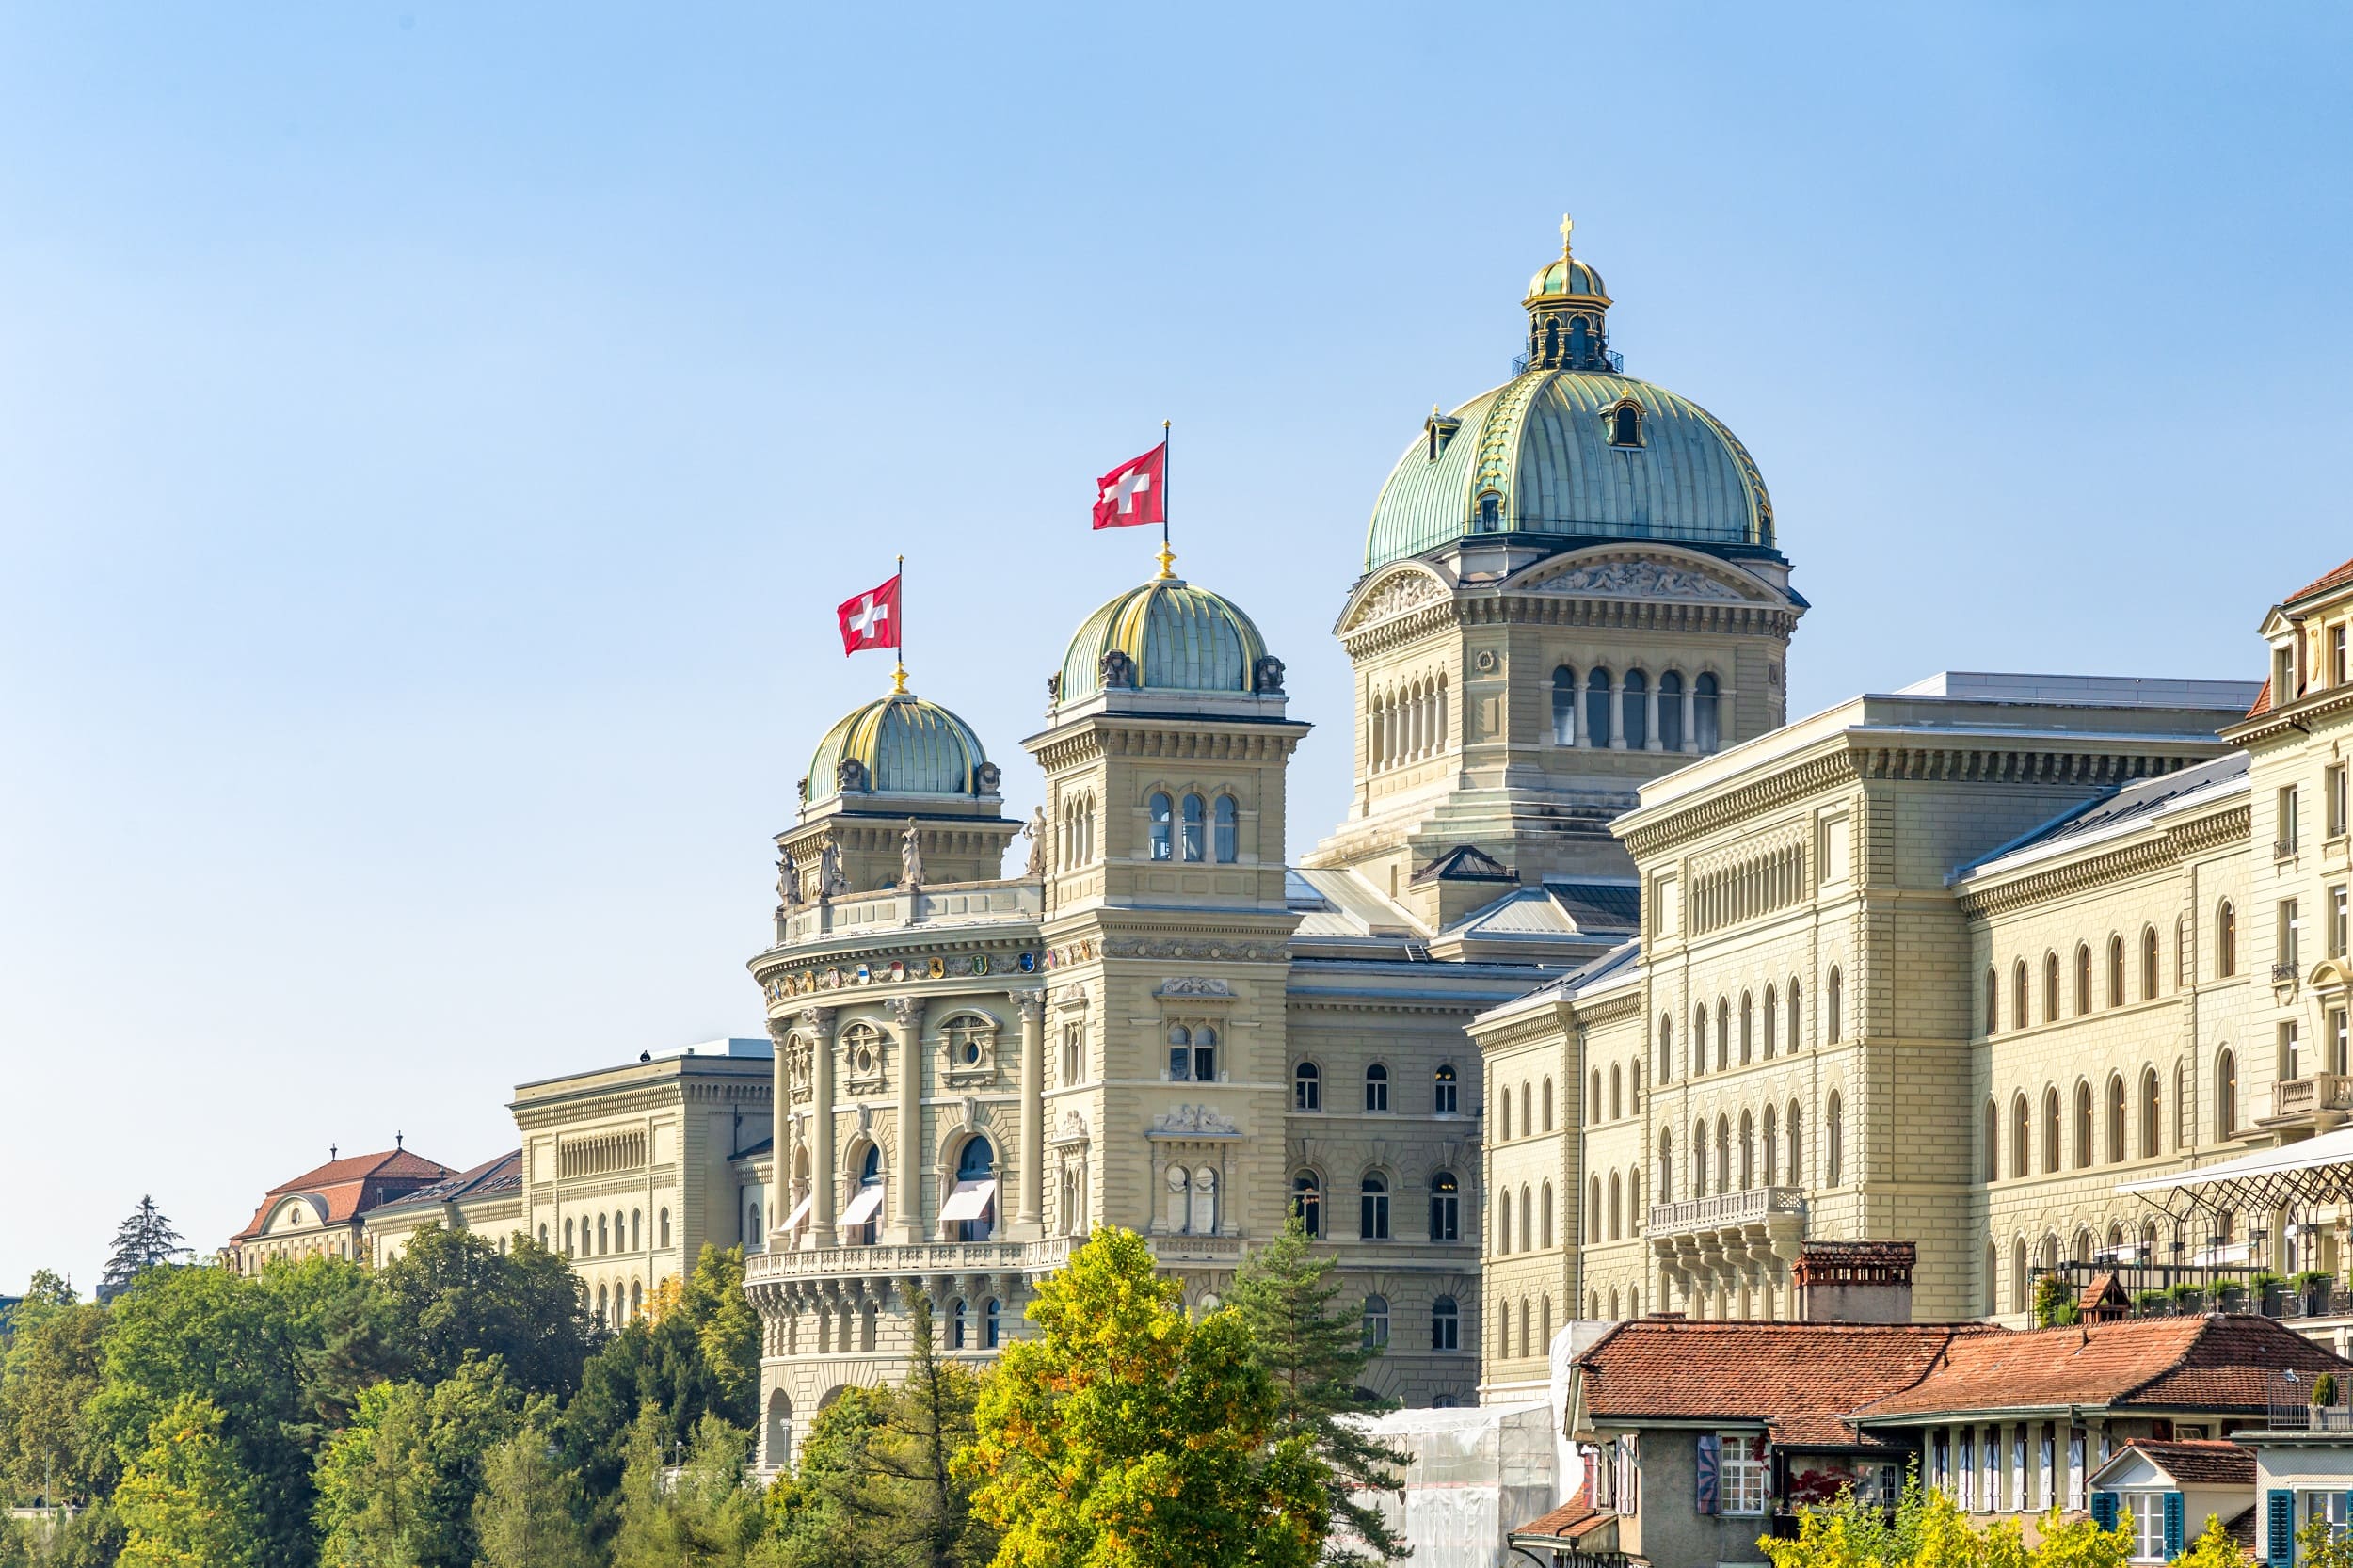 The Federal Palace in Bern as a sign of Switzerland's independence